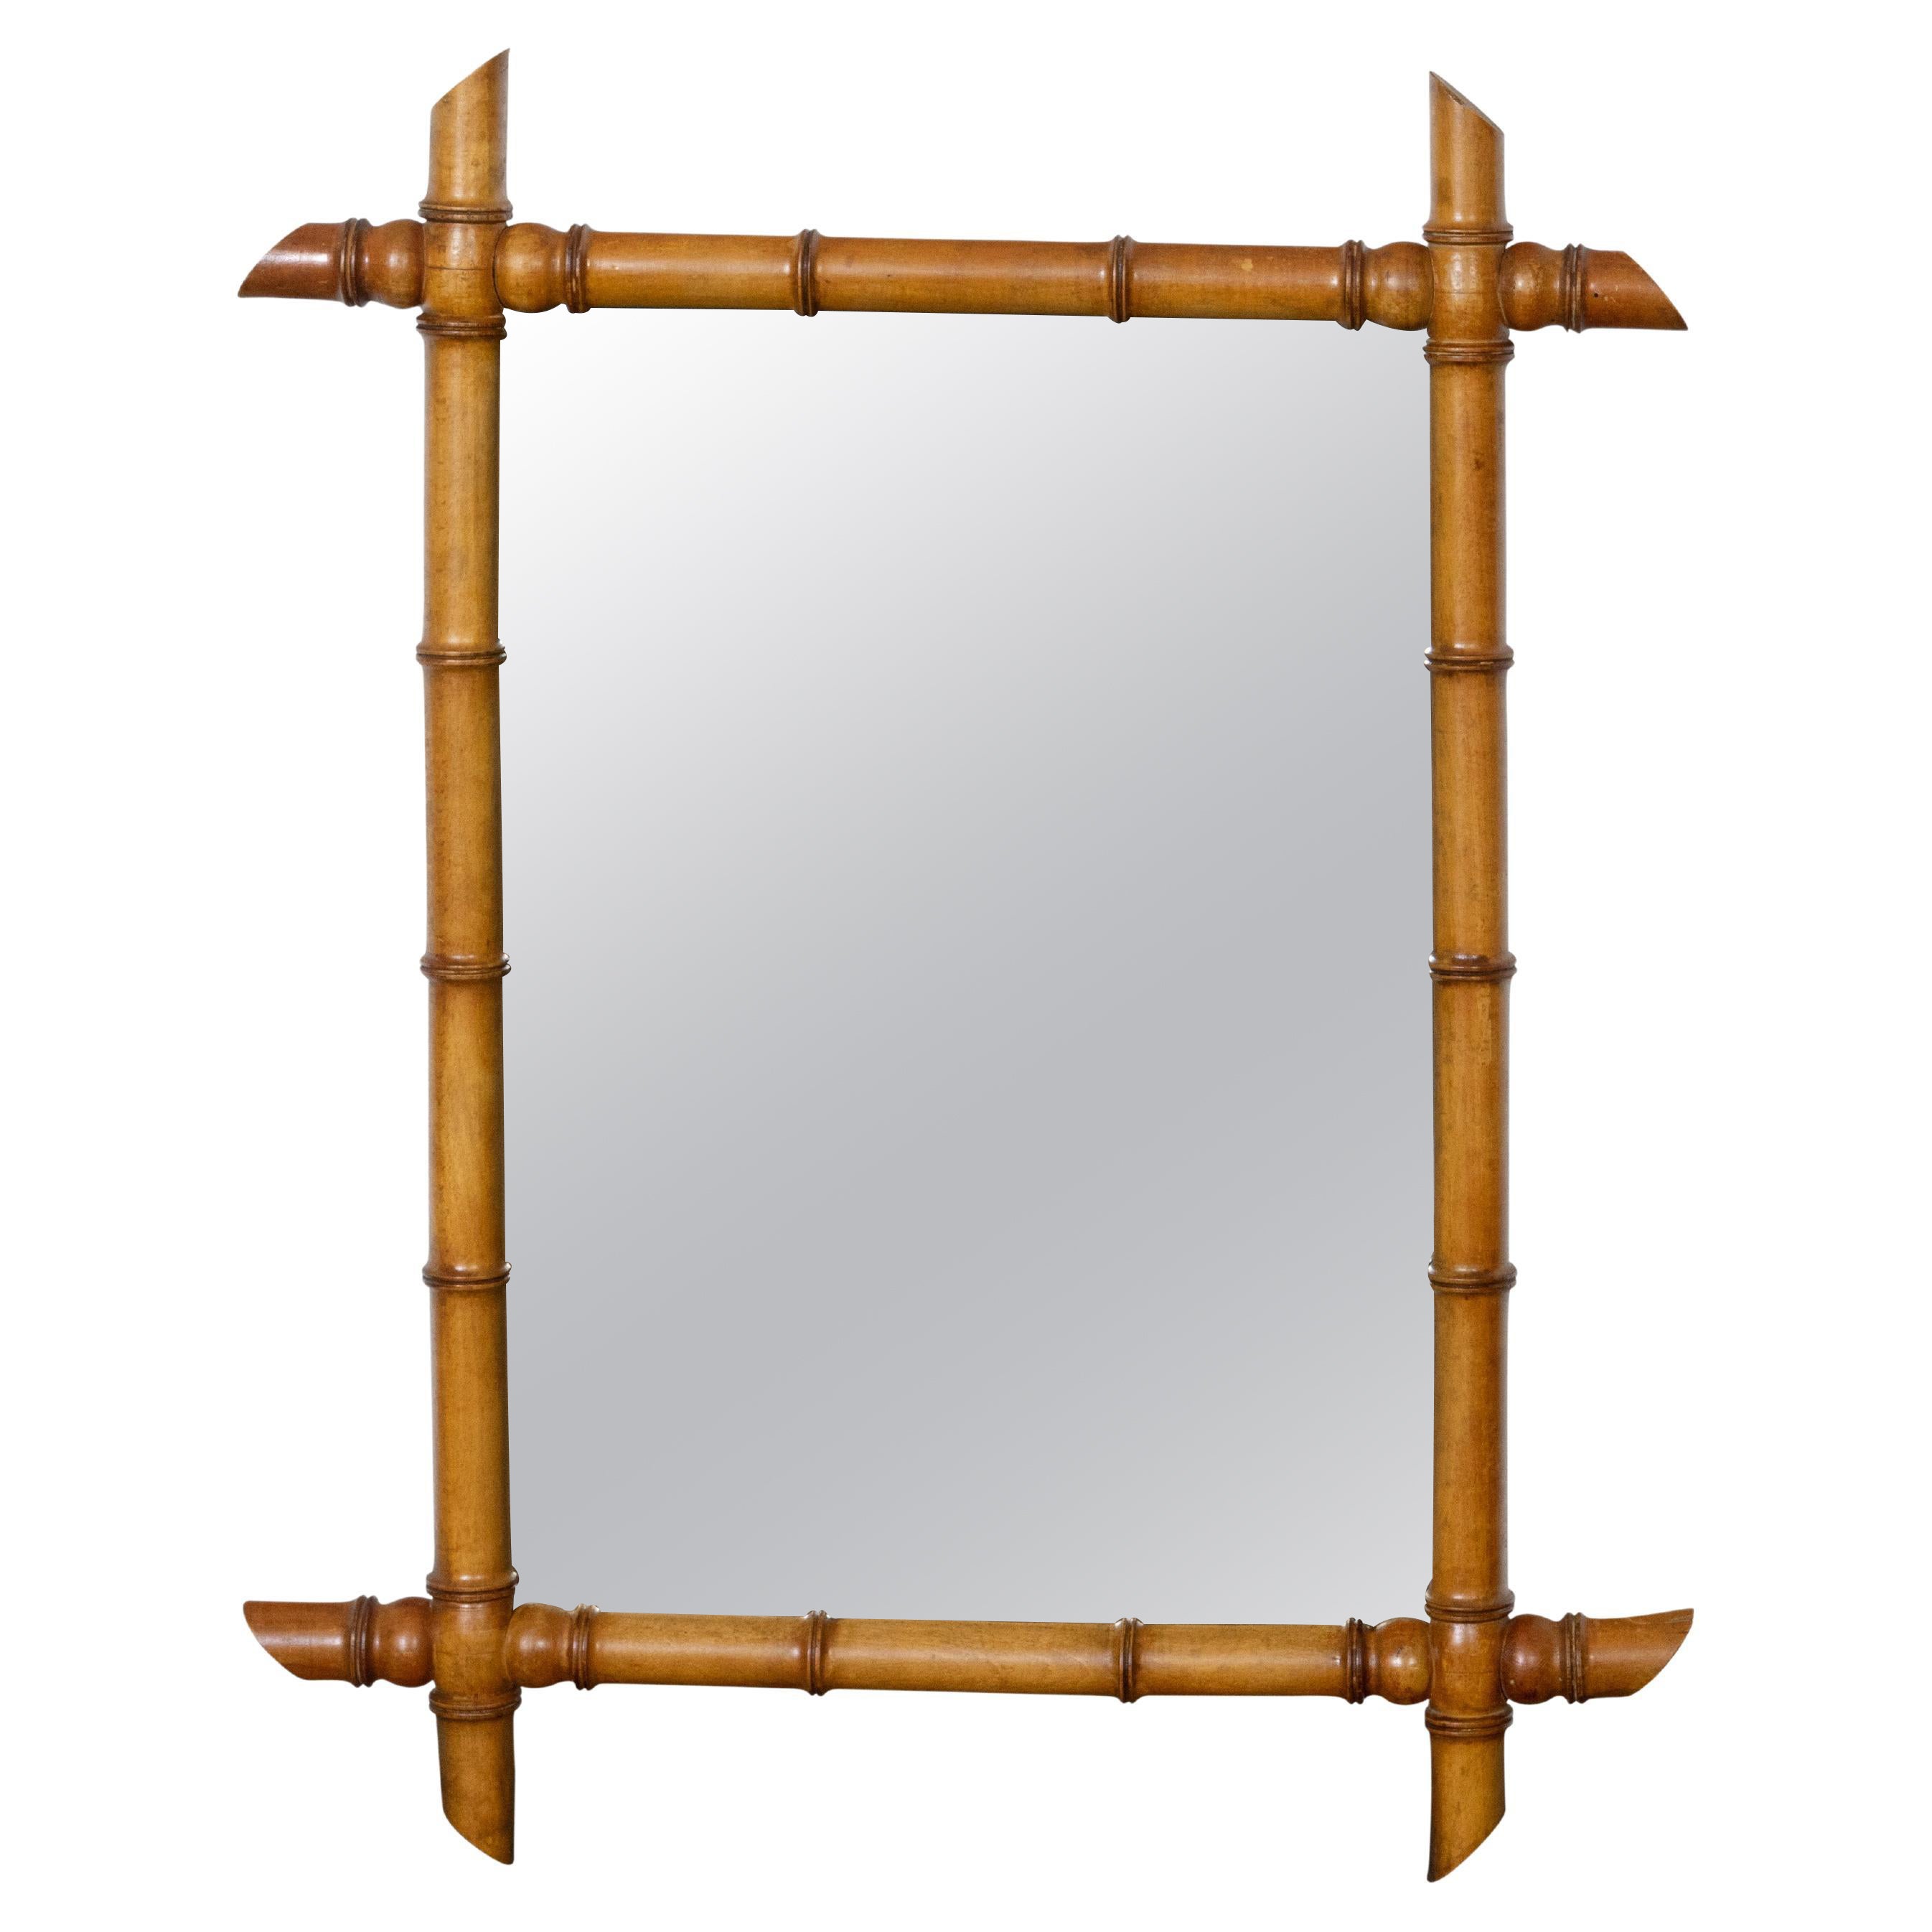 French Walnut Faux-Bamboo Mirror with Intersecting Corners, circa 1920